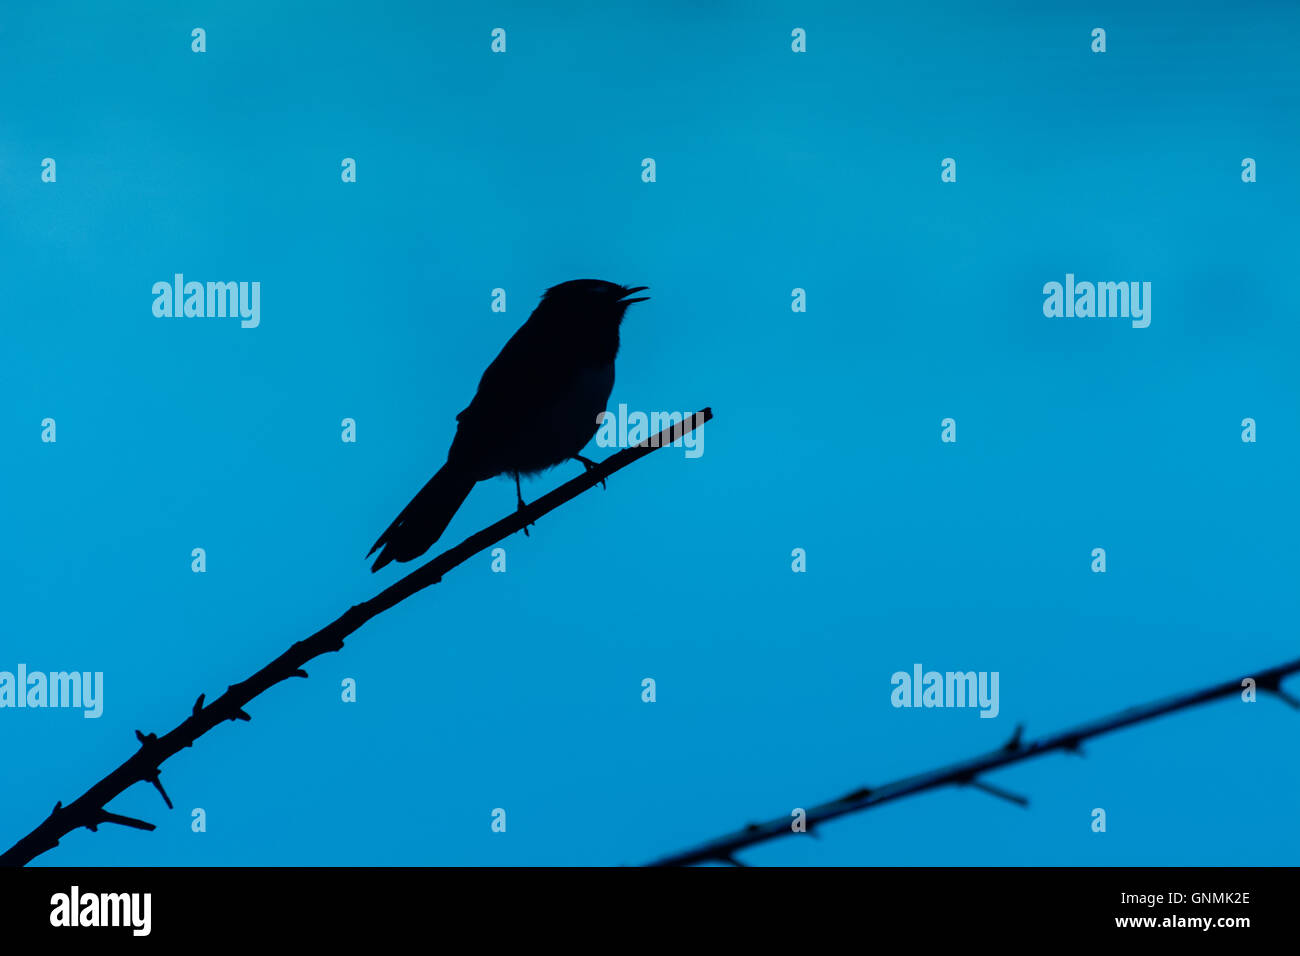 Silhouette of a Willy wagtail bird sitting on a branch against a blue background Stock Photo